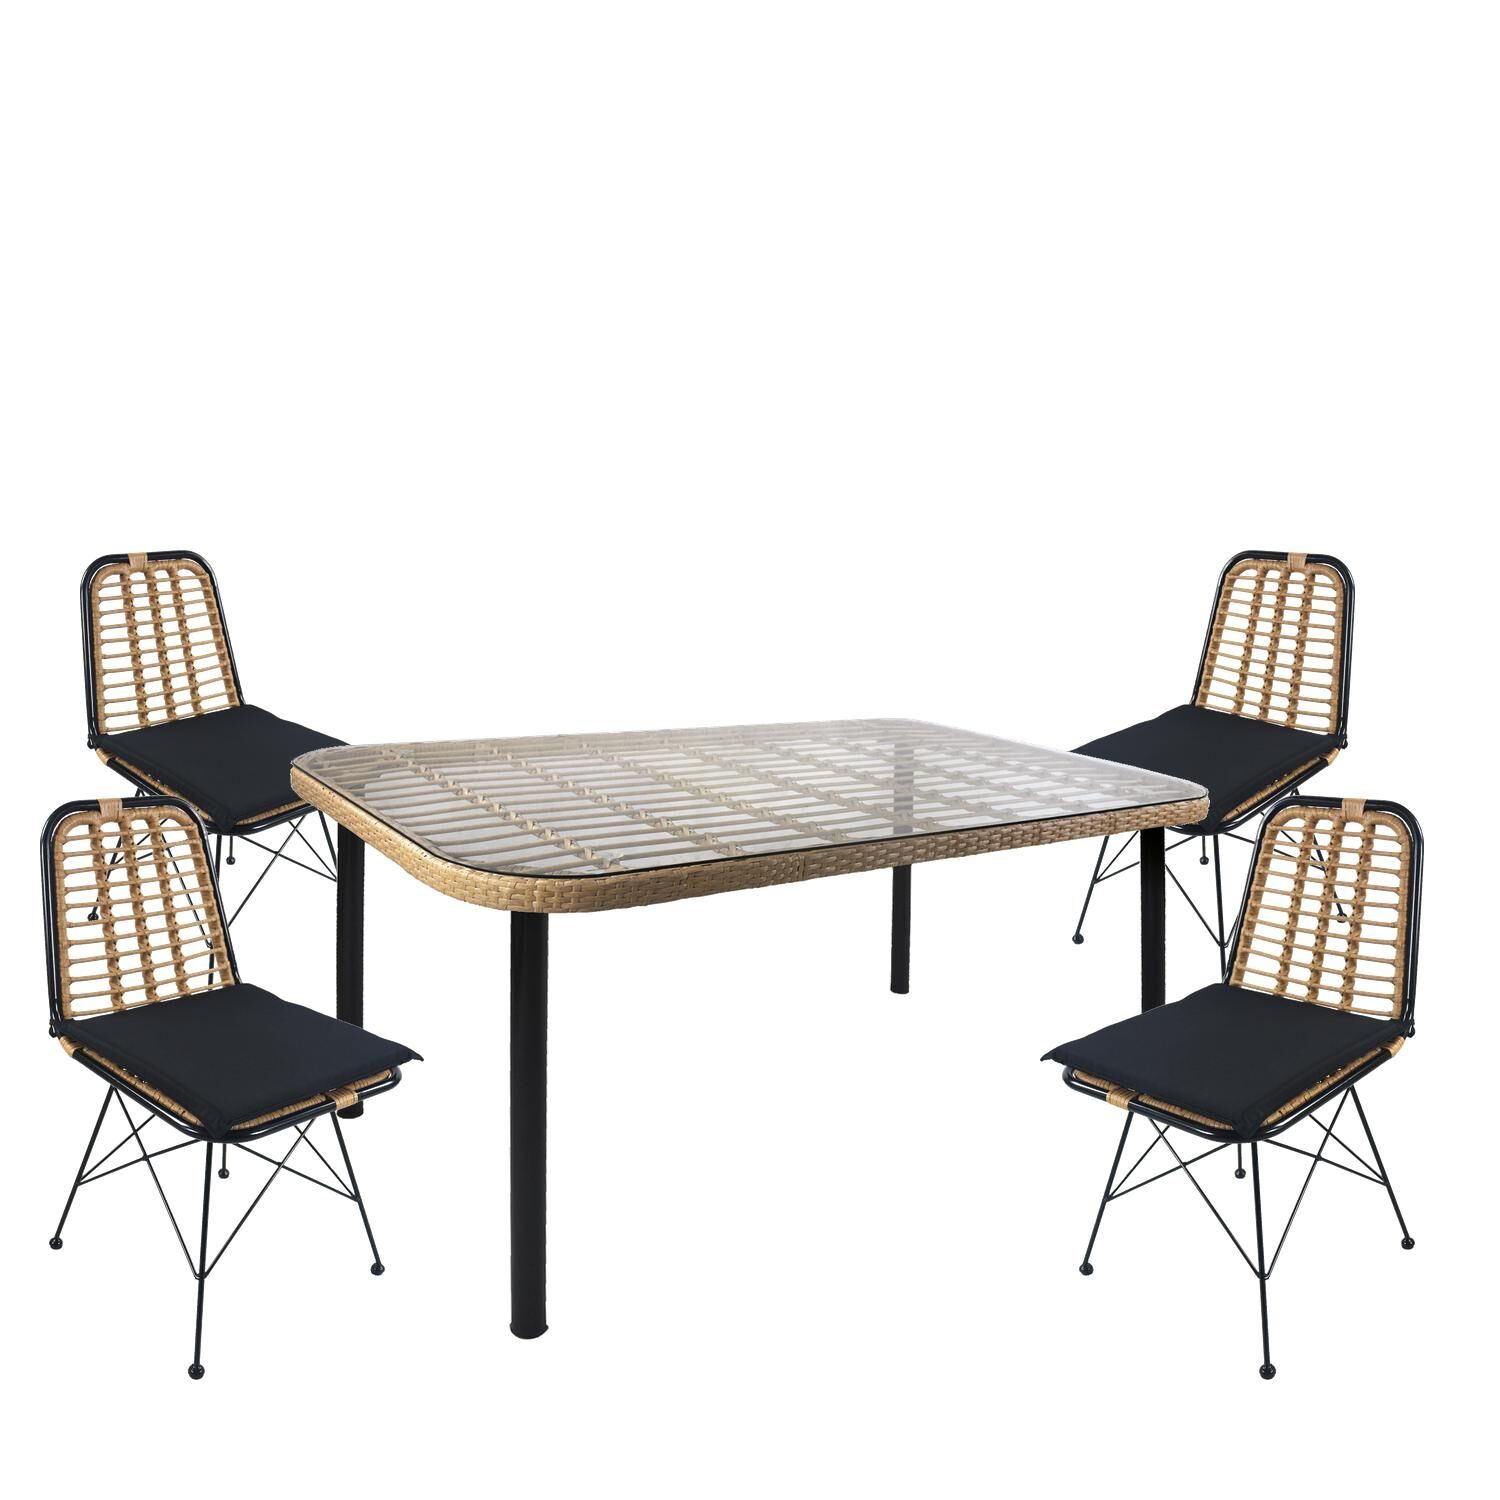 AMPIUS Garden Dining Set Natural/Black Metal/Rattan/Glass With 4 Chairs 14990299